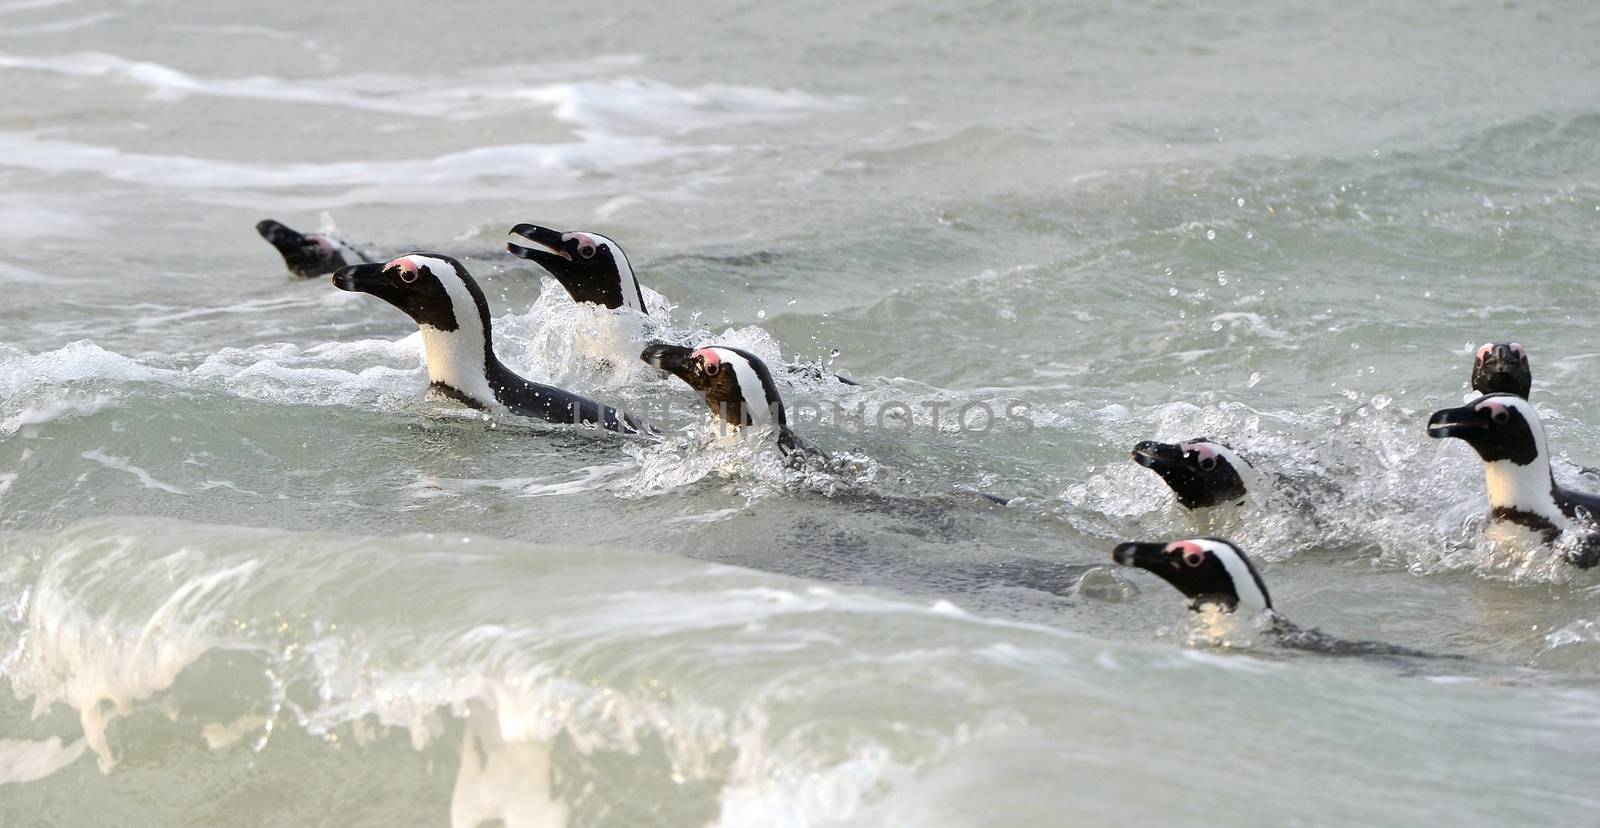 Swimming African Penguins.The African penguin (Spheniscus demersus), also known as the jackass penguin and black-footed penguin is a species of penguin, confined to southern African waters. 